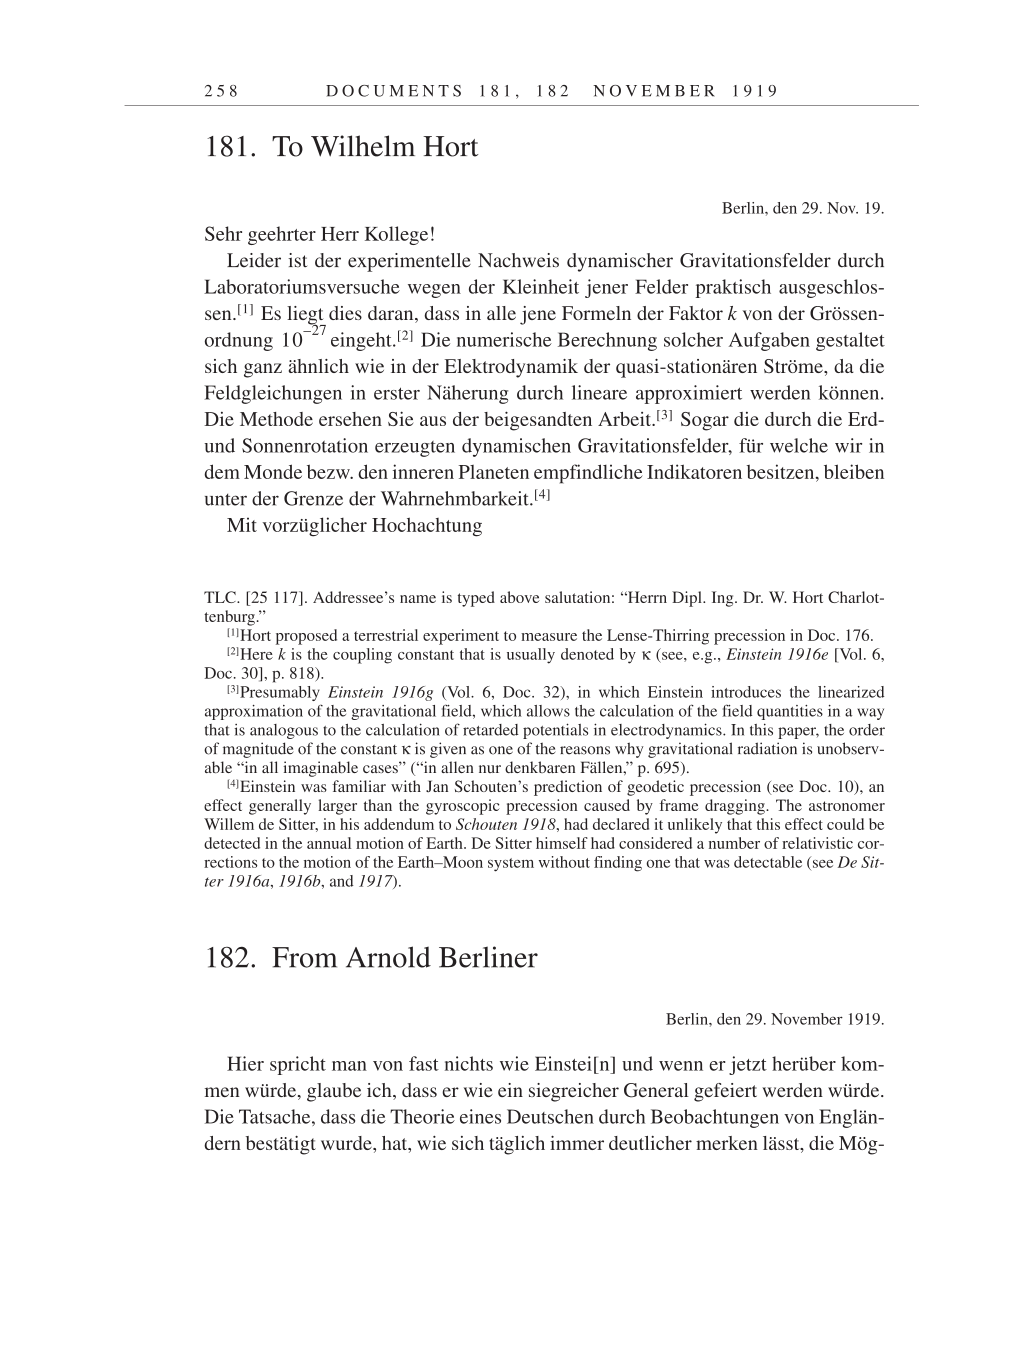 Volume 9: The Berlin Years: Correspondence January 1919-April 1920 page 258